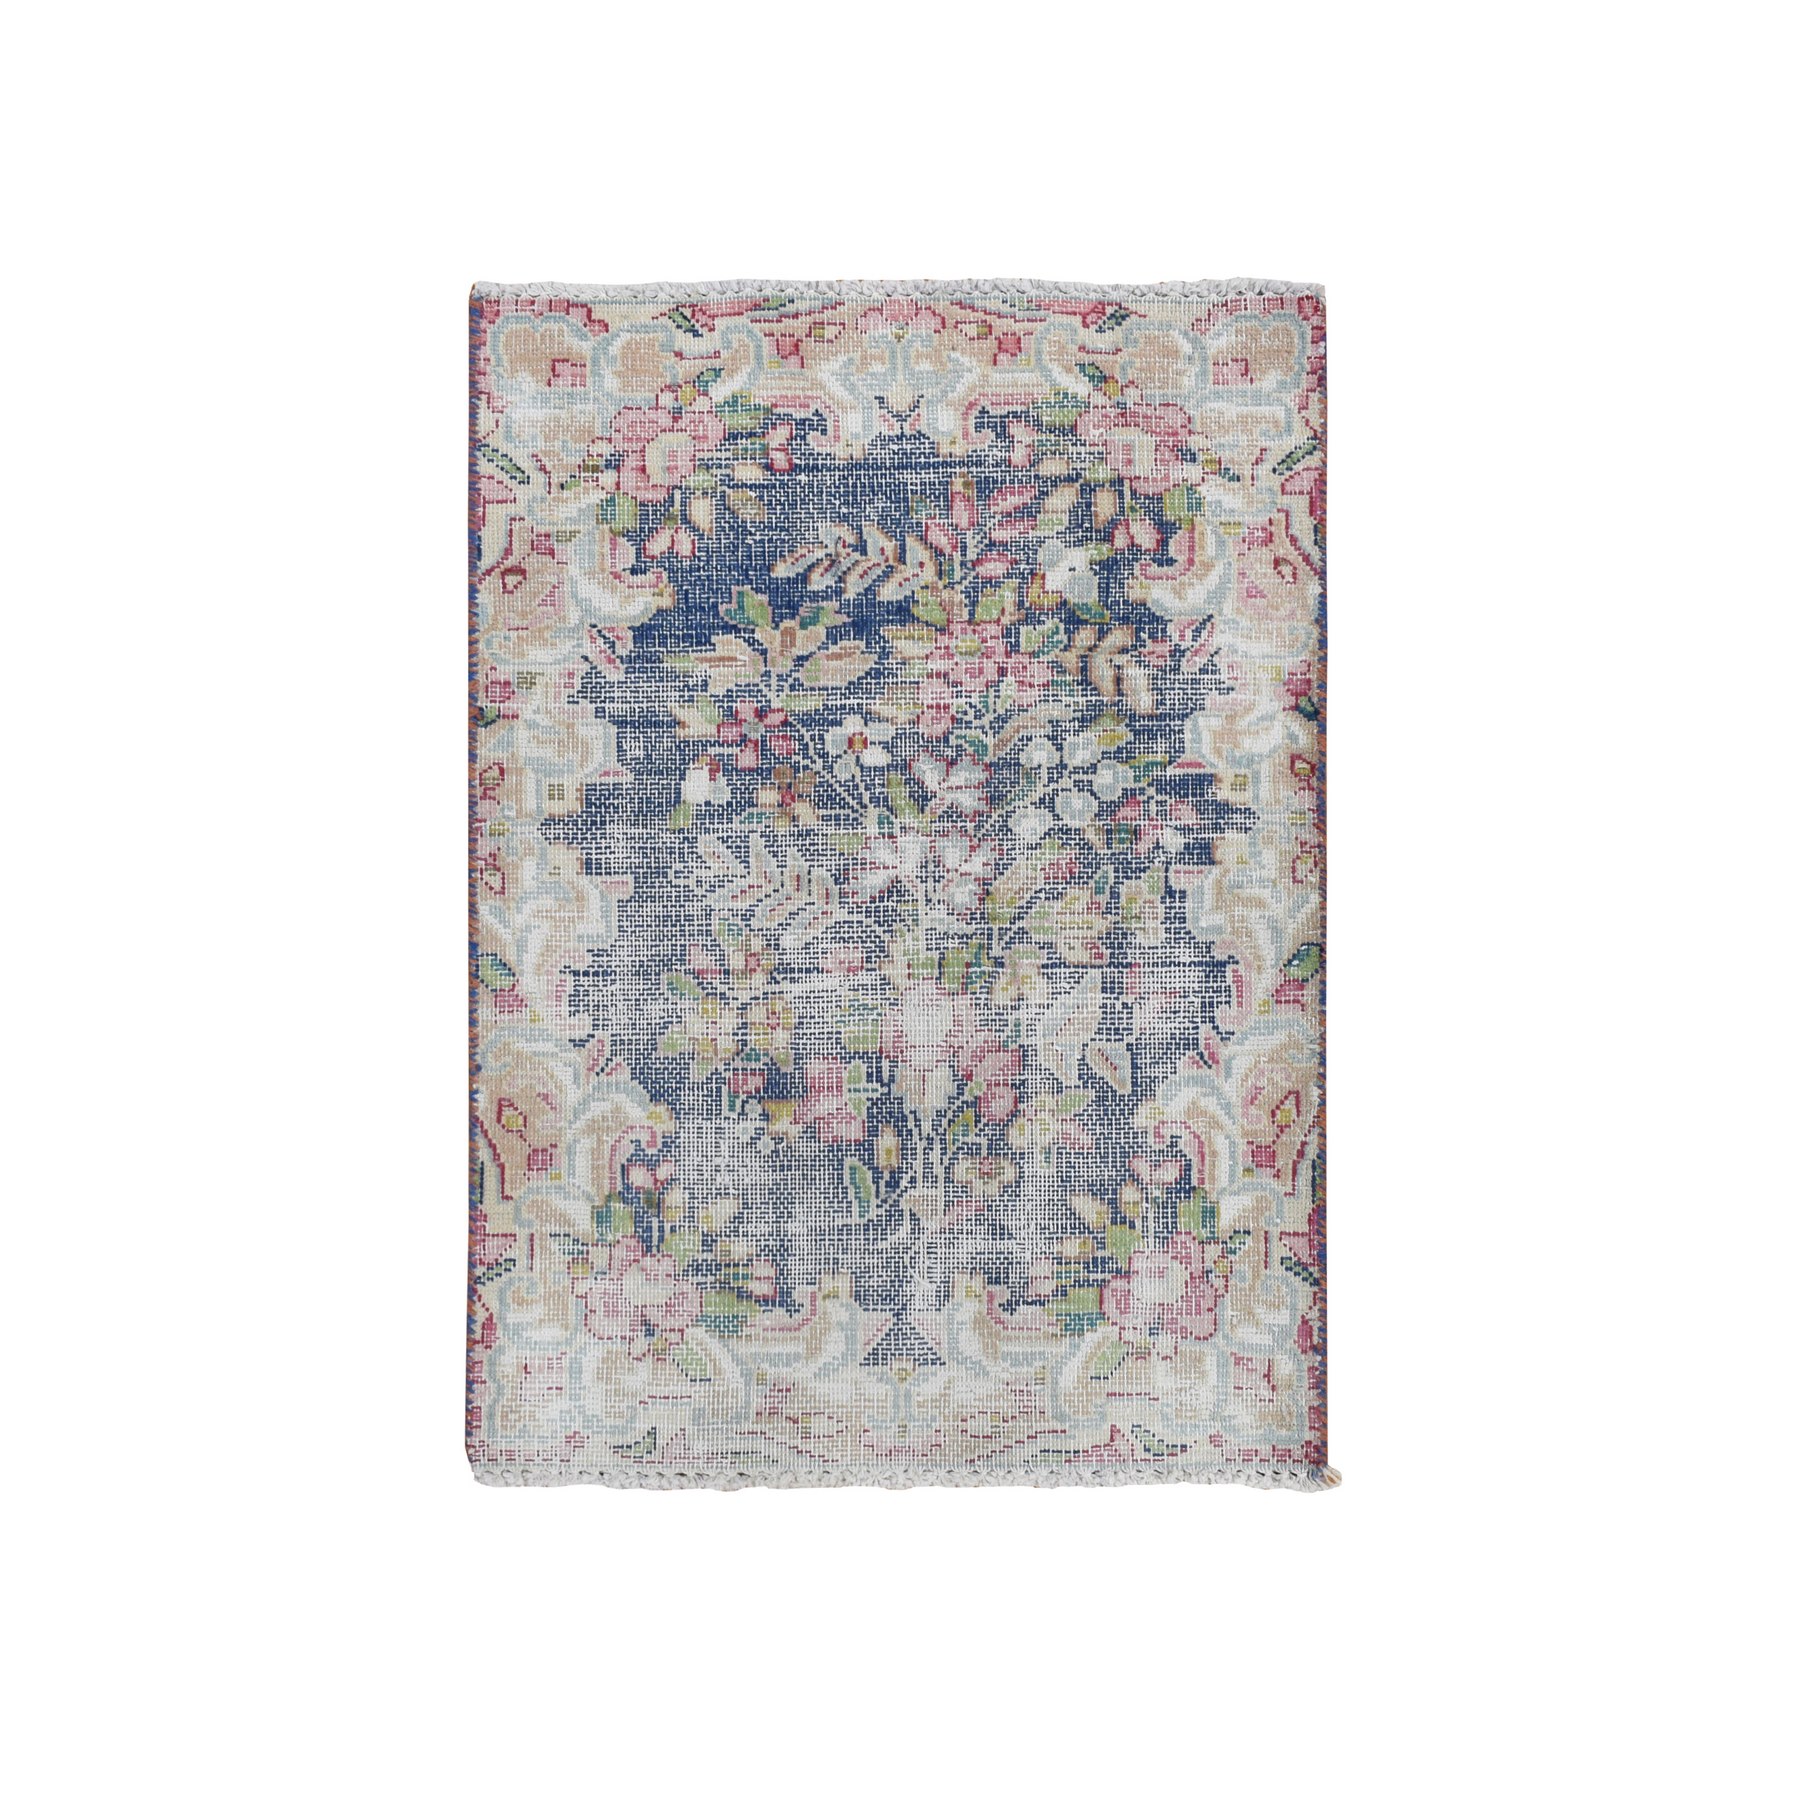  Wool Hand-Knotted Area Rug 1'7